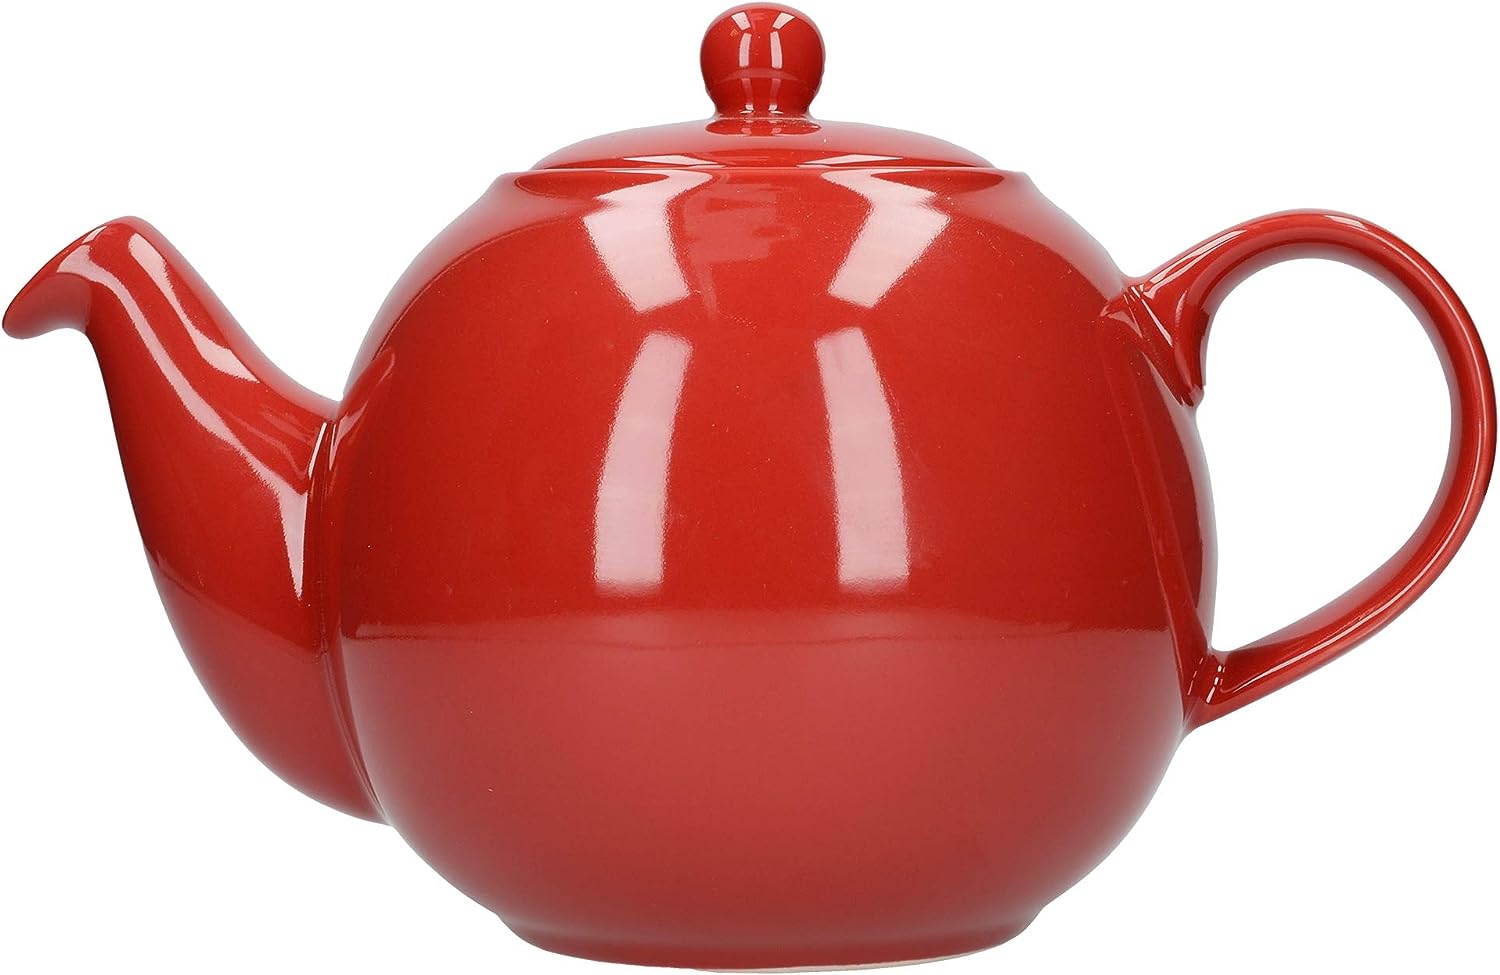 London Pottery Globe Large Teapot with Strainer Ceramic Red 8 Cups (1.8 Litre)